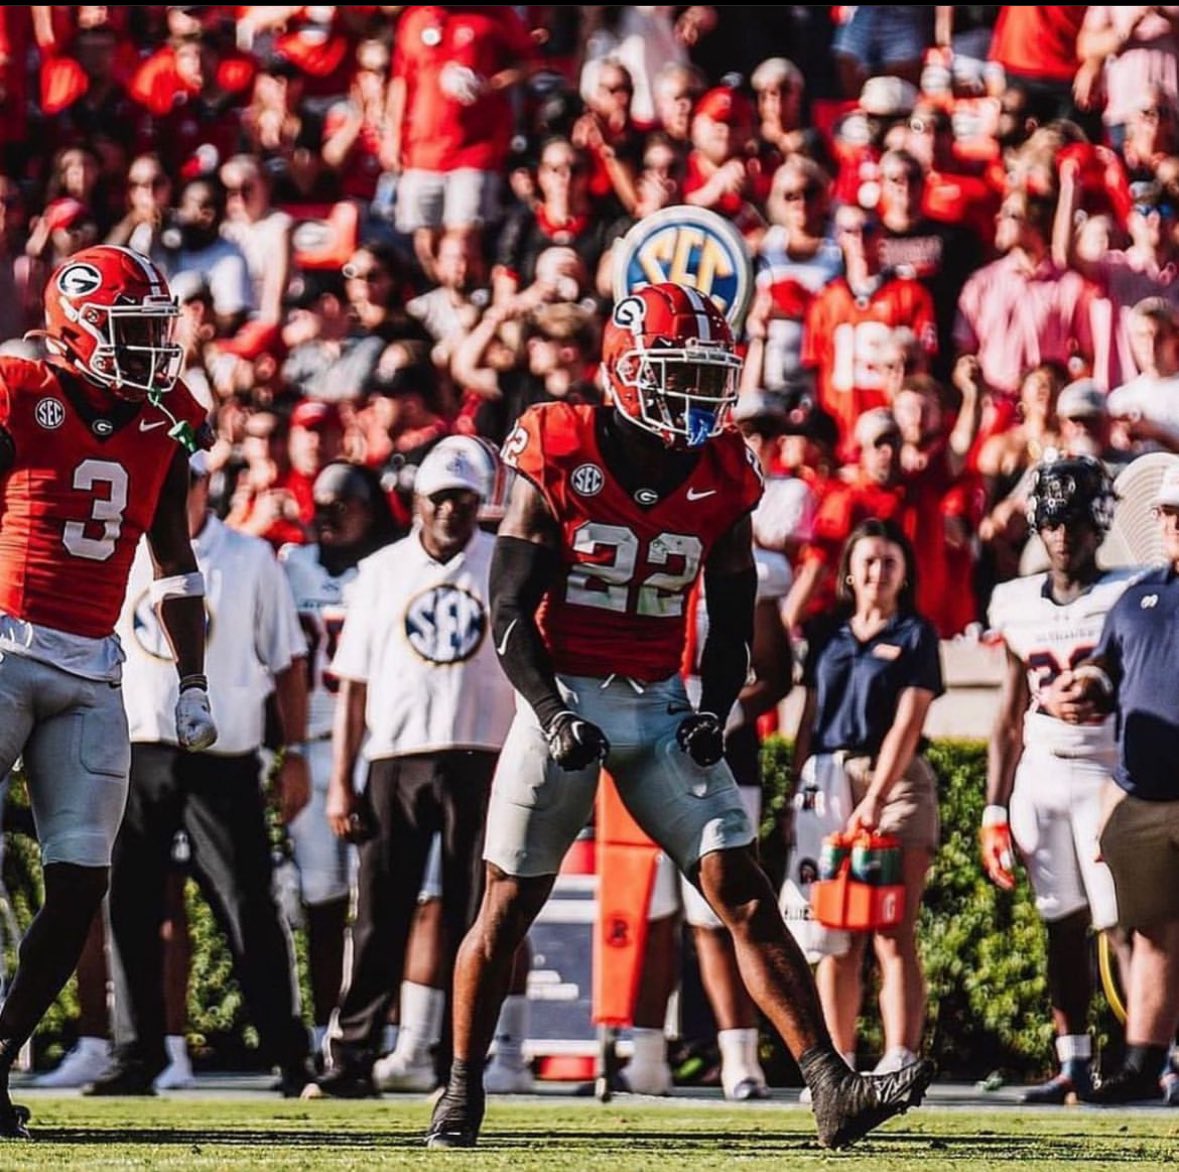 #16 #agtg Extremely Blessed to receive A(n) PWO from the UNIVERSITY OF GEORGIA 🙏🏿 @Coach_TRob @CoachDee_UGA @EricDevoursney @CoachSmith_PHS @coach_Mahler @tone2782 @DawgNation @RustyMansell_ @On3Recruits @RecruitGeorgia @Dawgs247 @ChadSimmons_ @coachspurley56